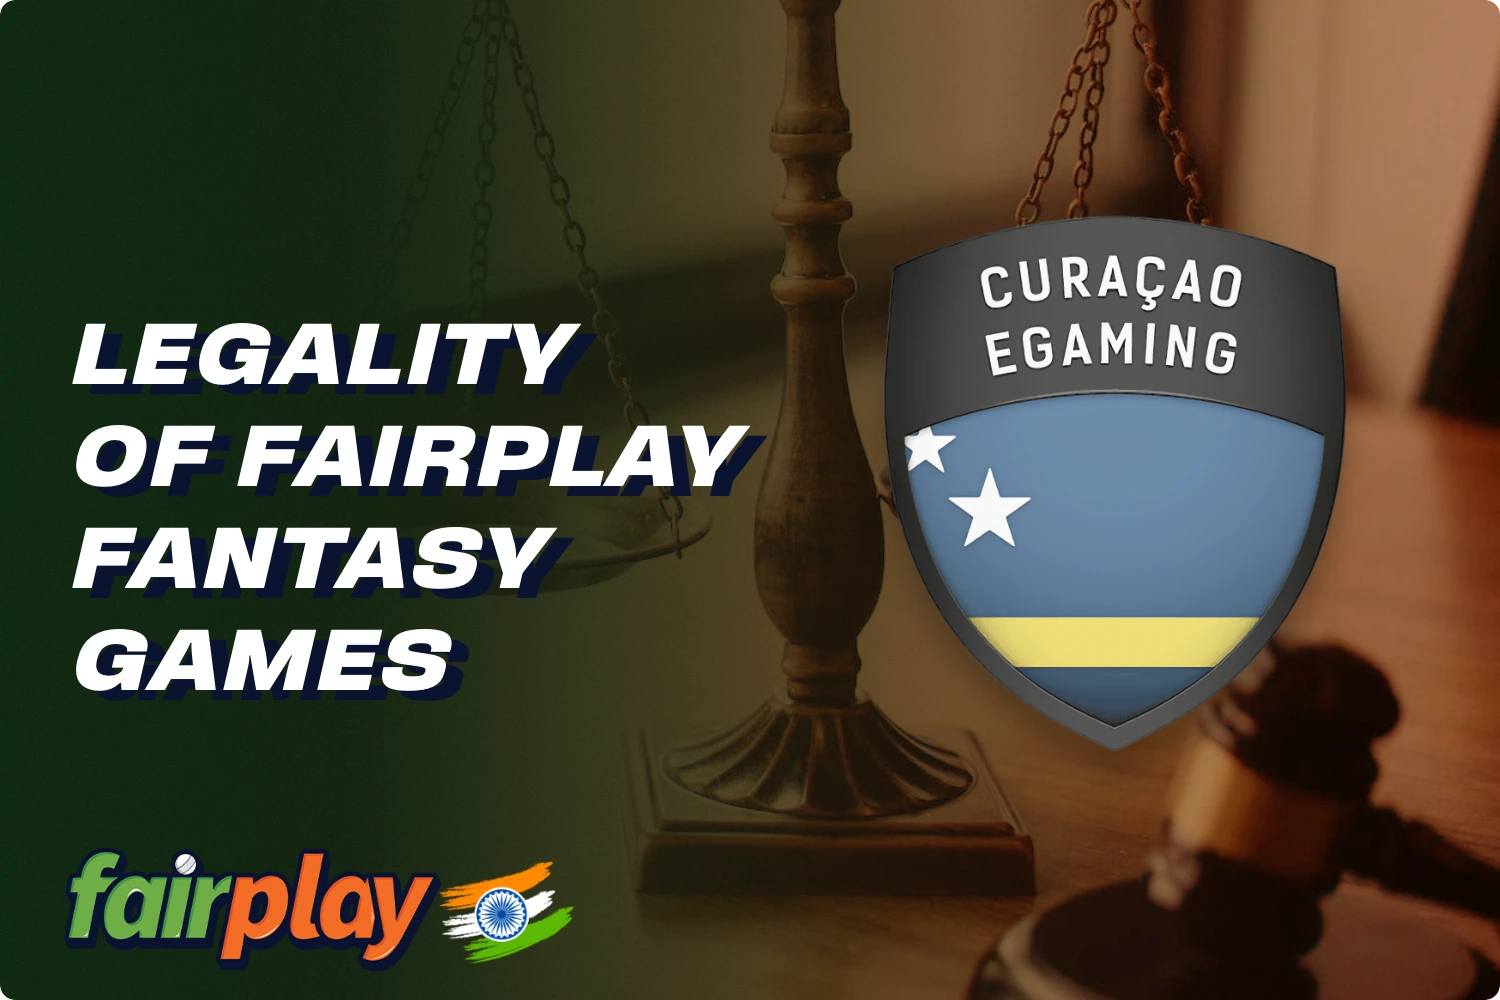 Fairplay has a special license that gives it the ability to provide its services